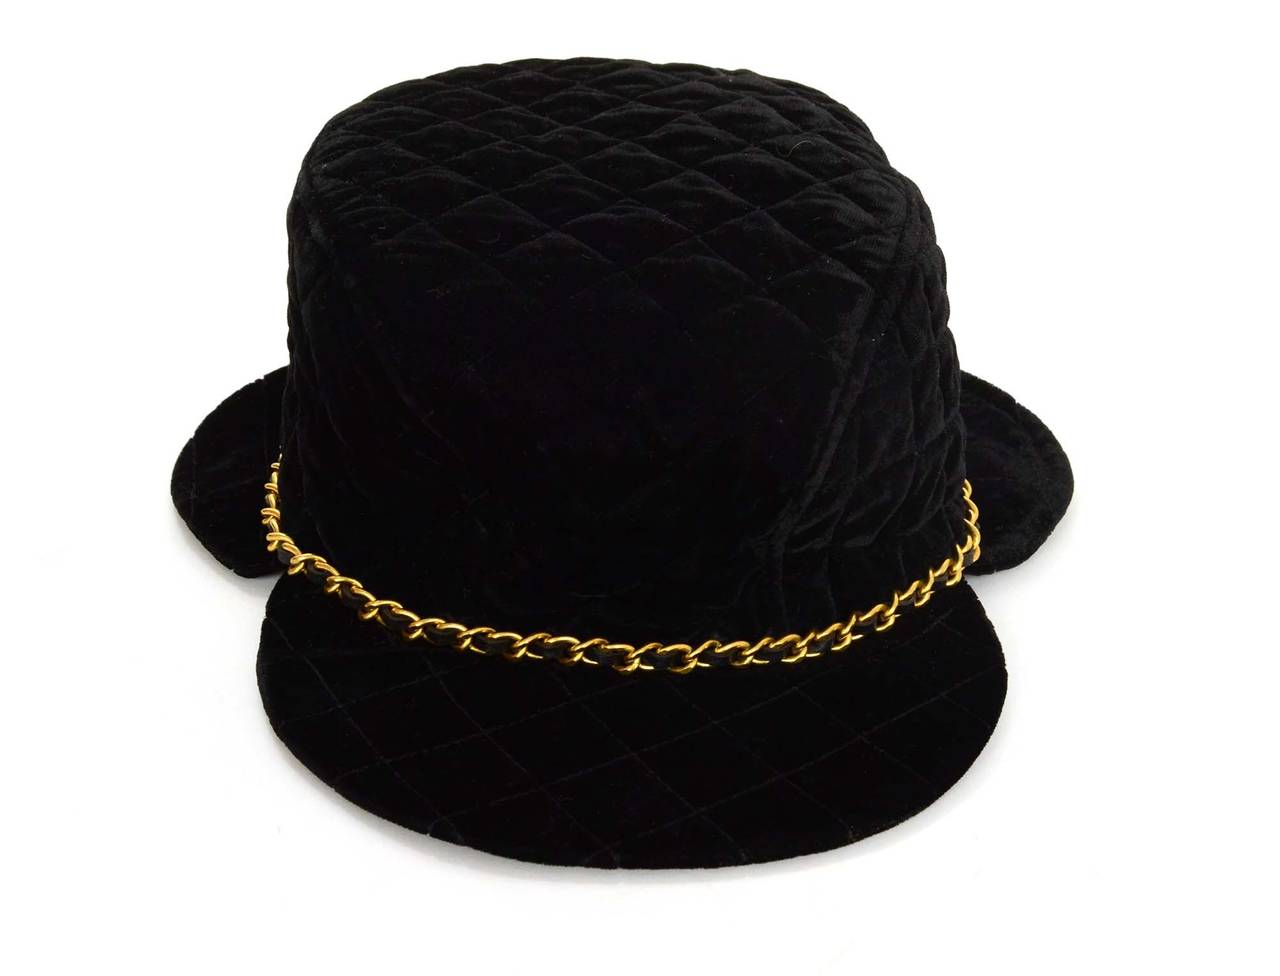 Chanel Black Quilted Velvet Trapper Hat
Features leather woven goldtone chain detailing around top
Color: Black and goldtone
Composition: Velvet
Lining: Black textile
Overall Condition: Excellent vintage, pre-owned condition with the exception